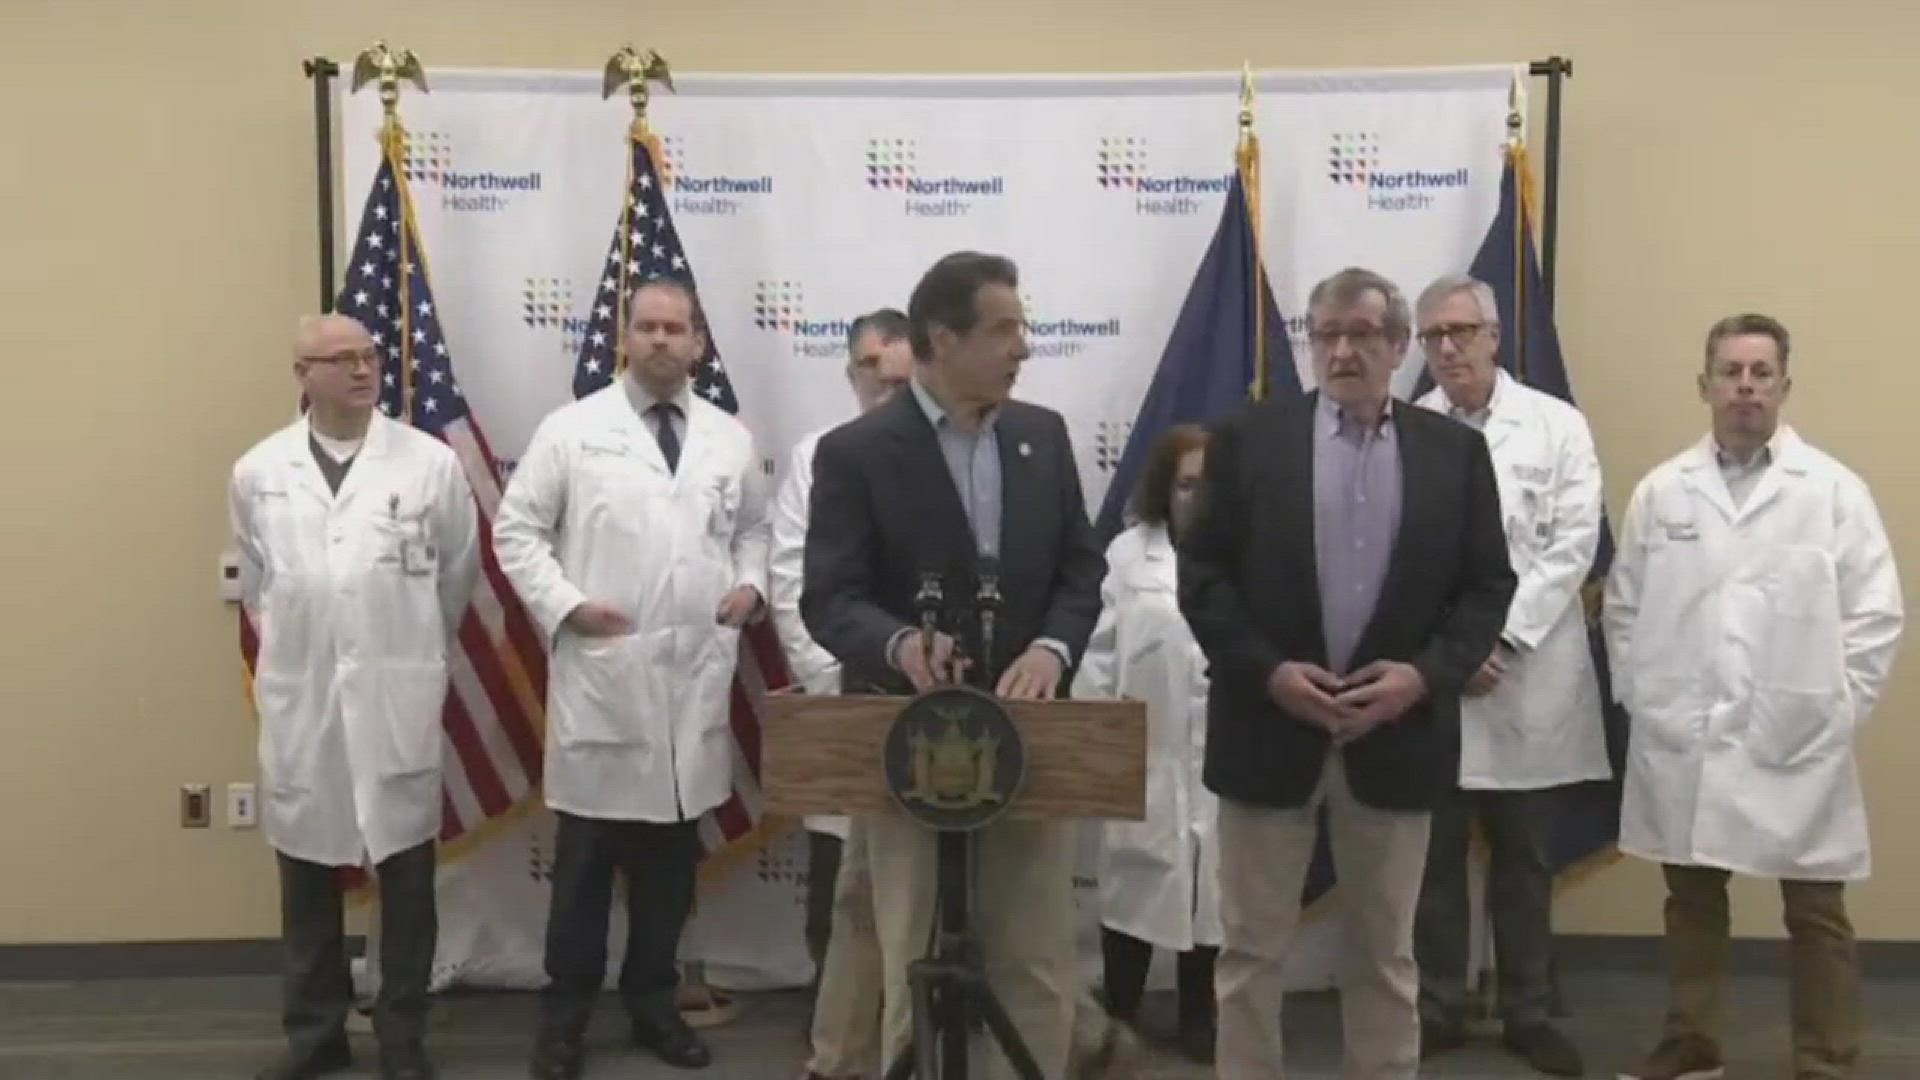 Cuomo announced that 16 additional cases of coronavirus have been confirmed in the state, bringing the total to 105 across New York State.